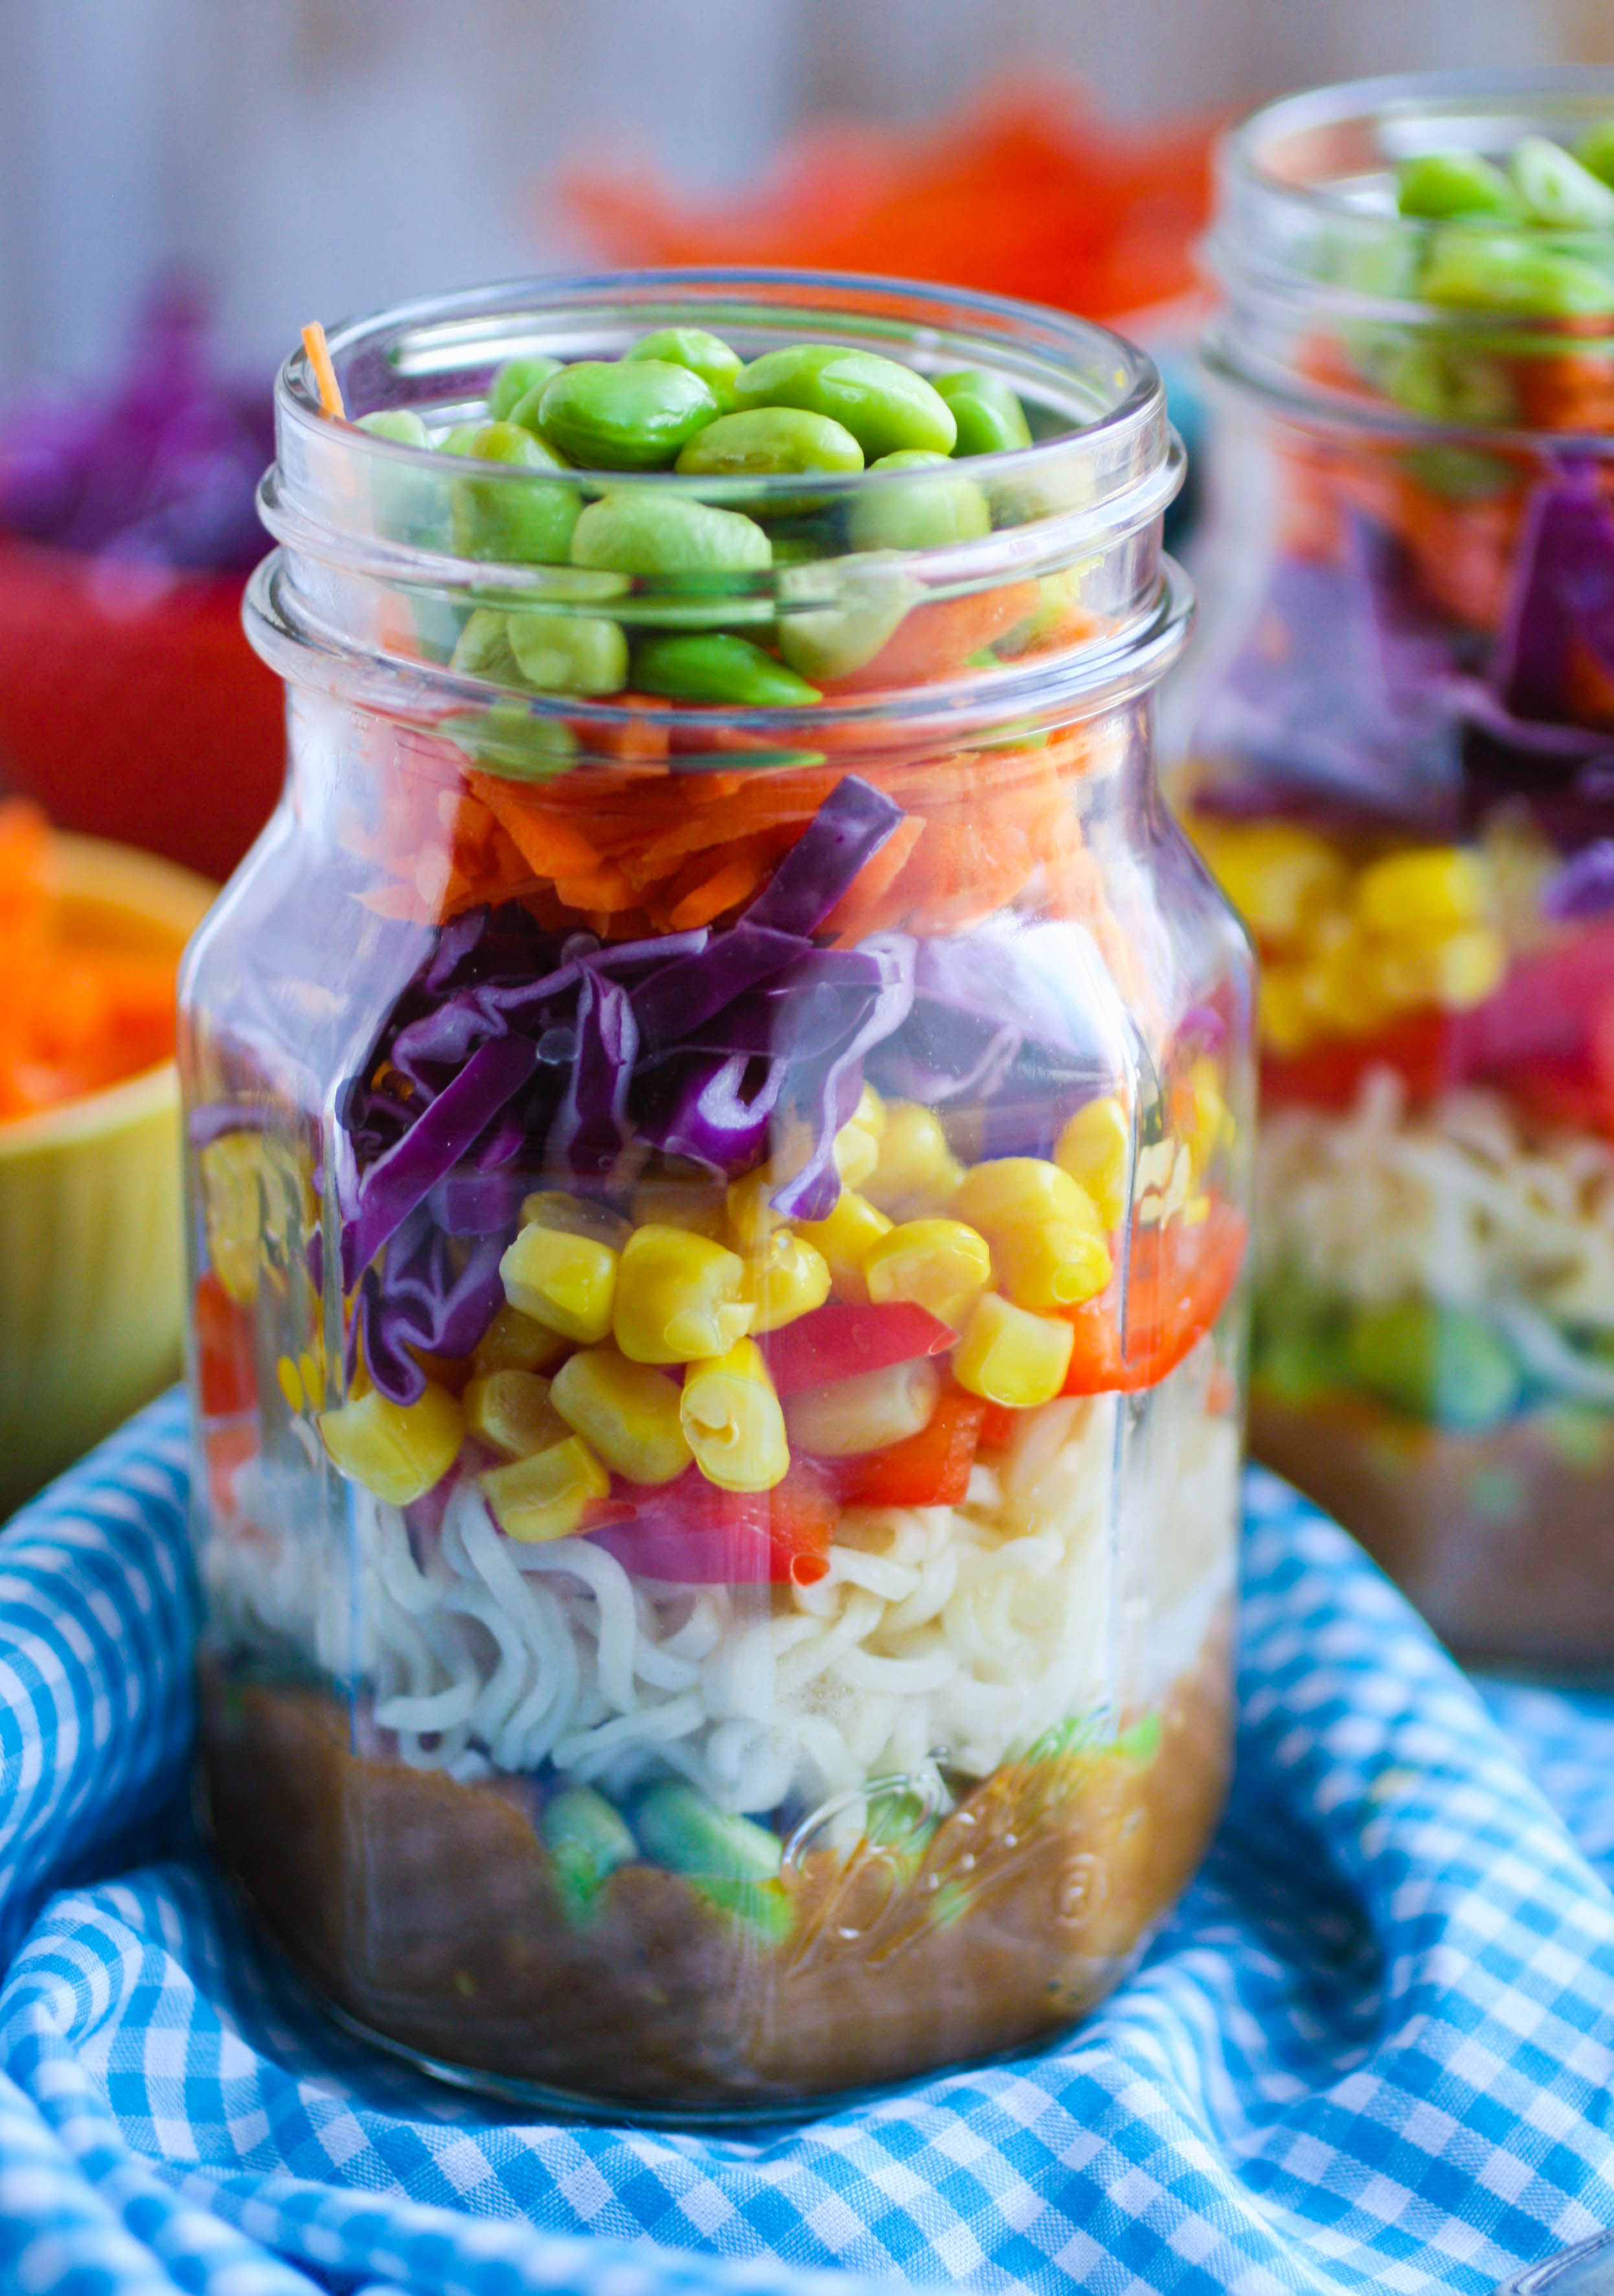 Asian Noodle Salad in a Jar with Spicy Peanut Dressing is a fun way to enjoy a salad. It's full of flavor and great color!